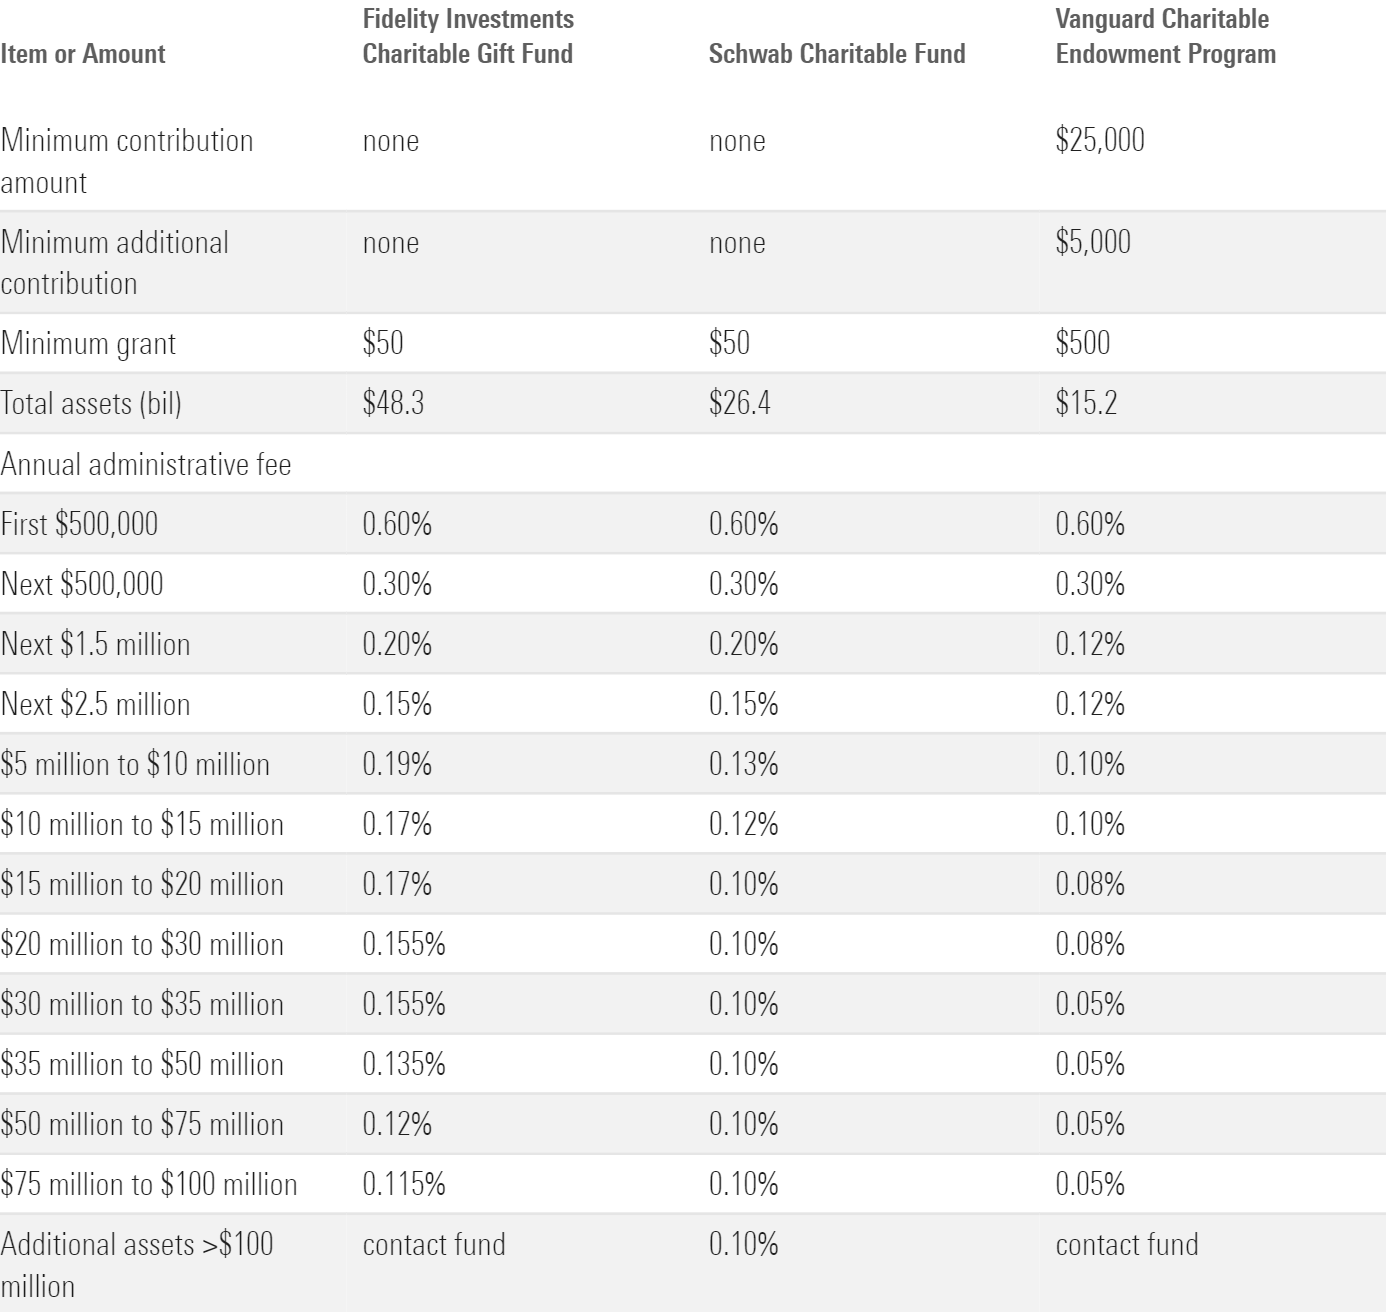 A table comparing investment minimums, fees, and other details among three donor-advised fund programs.